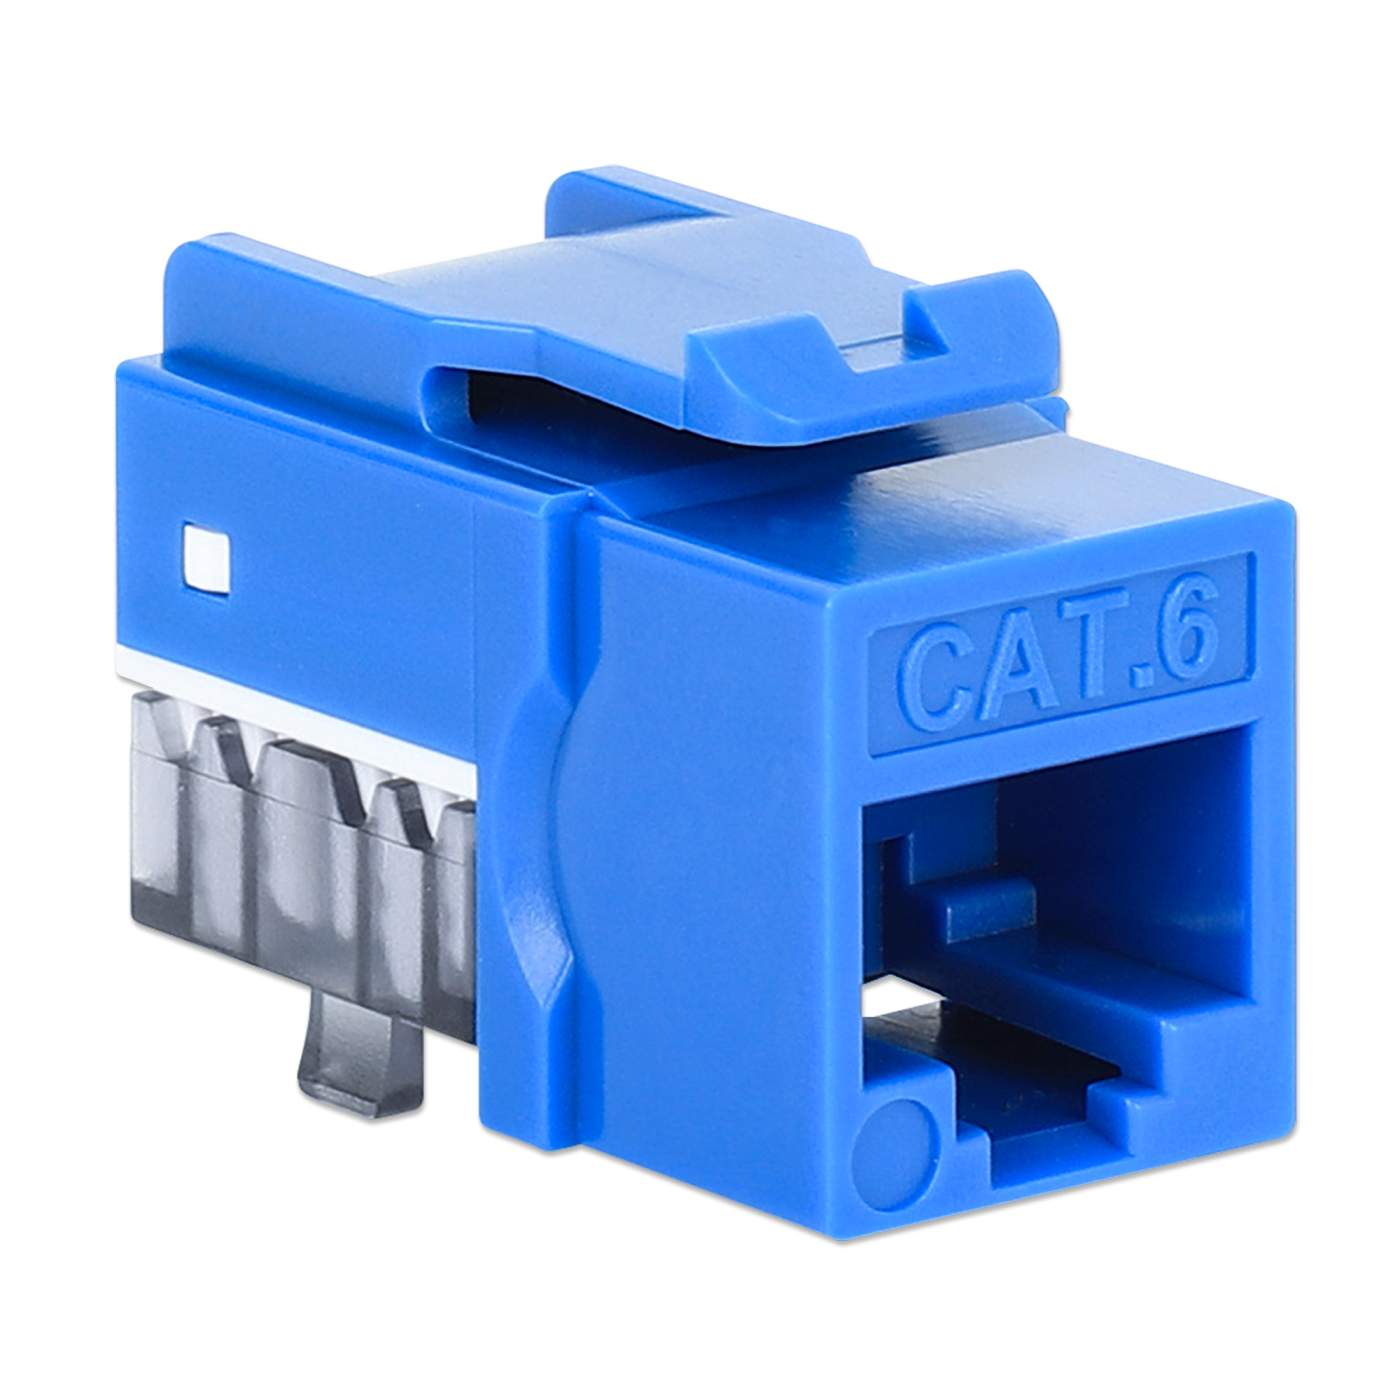 Cat6 Slim Keystone Jack with Punch-Down Stand, Blue, 25-Pack Image 3